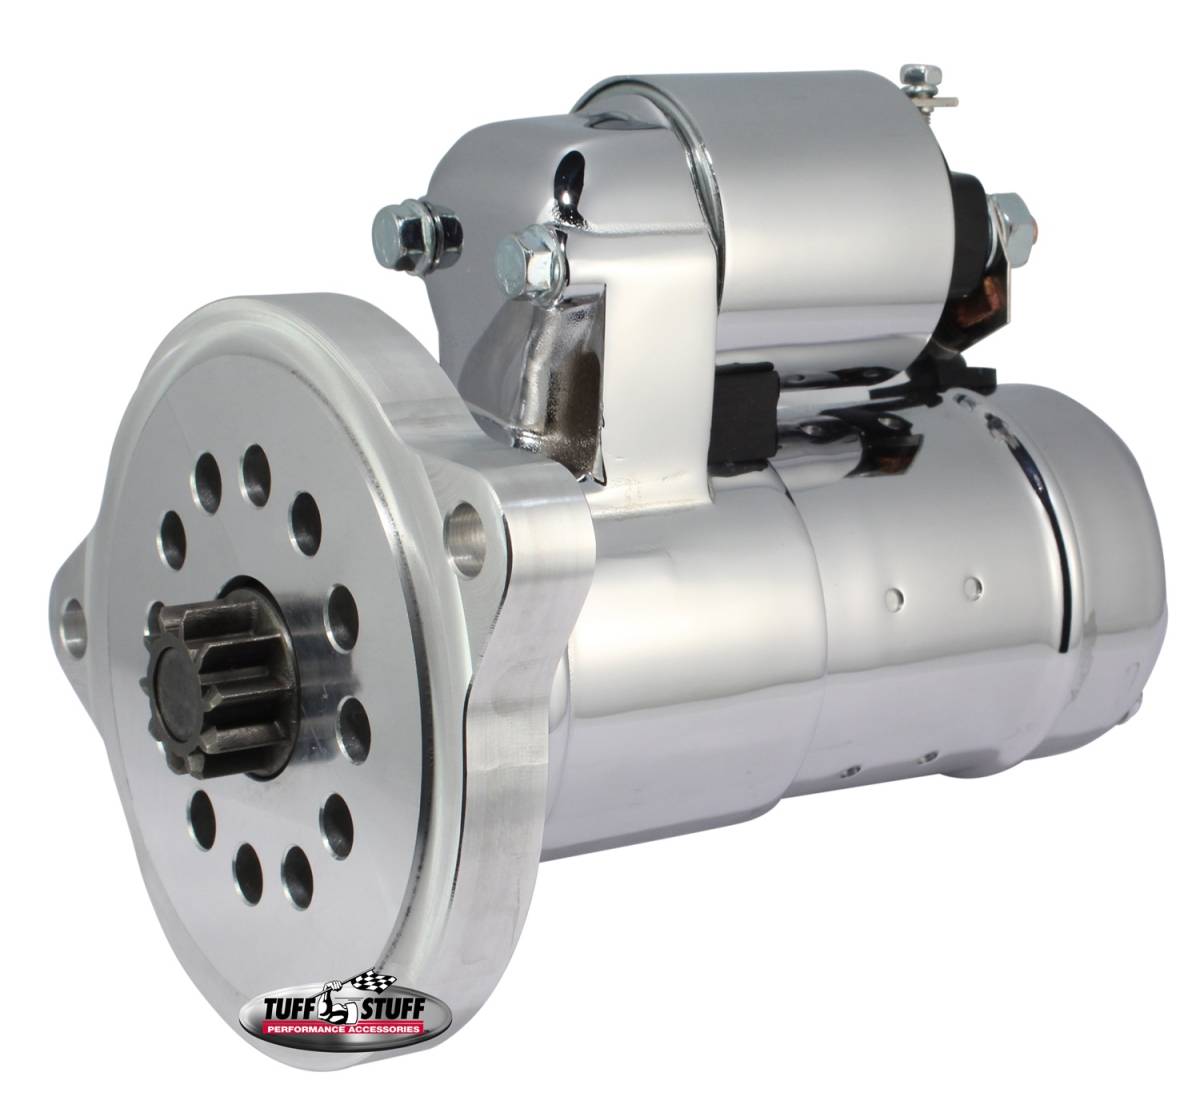 Tuff Stuff Performance - Gear Reduction Starter 1.6 KW Motor 2 Bolt Straight Mounting Indexable Chrome 6551A